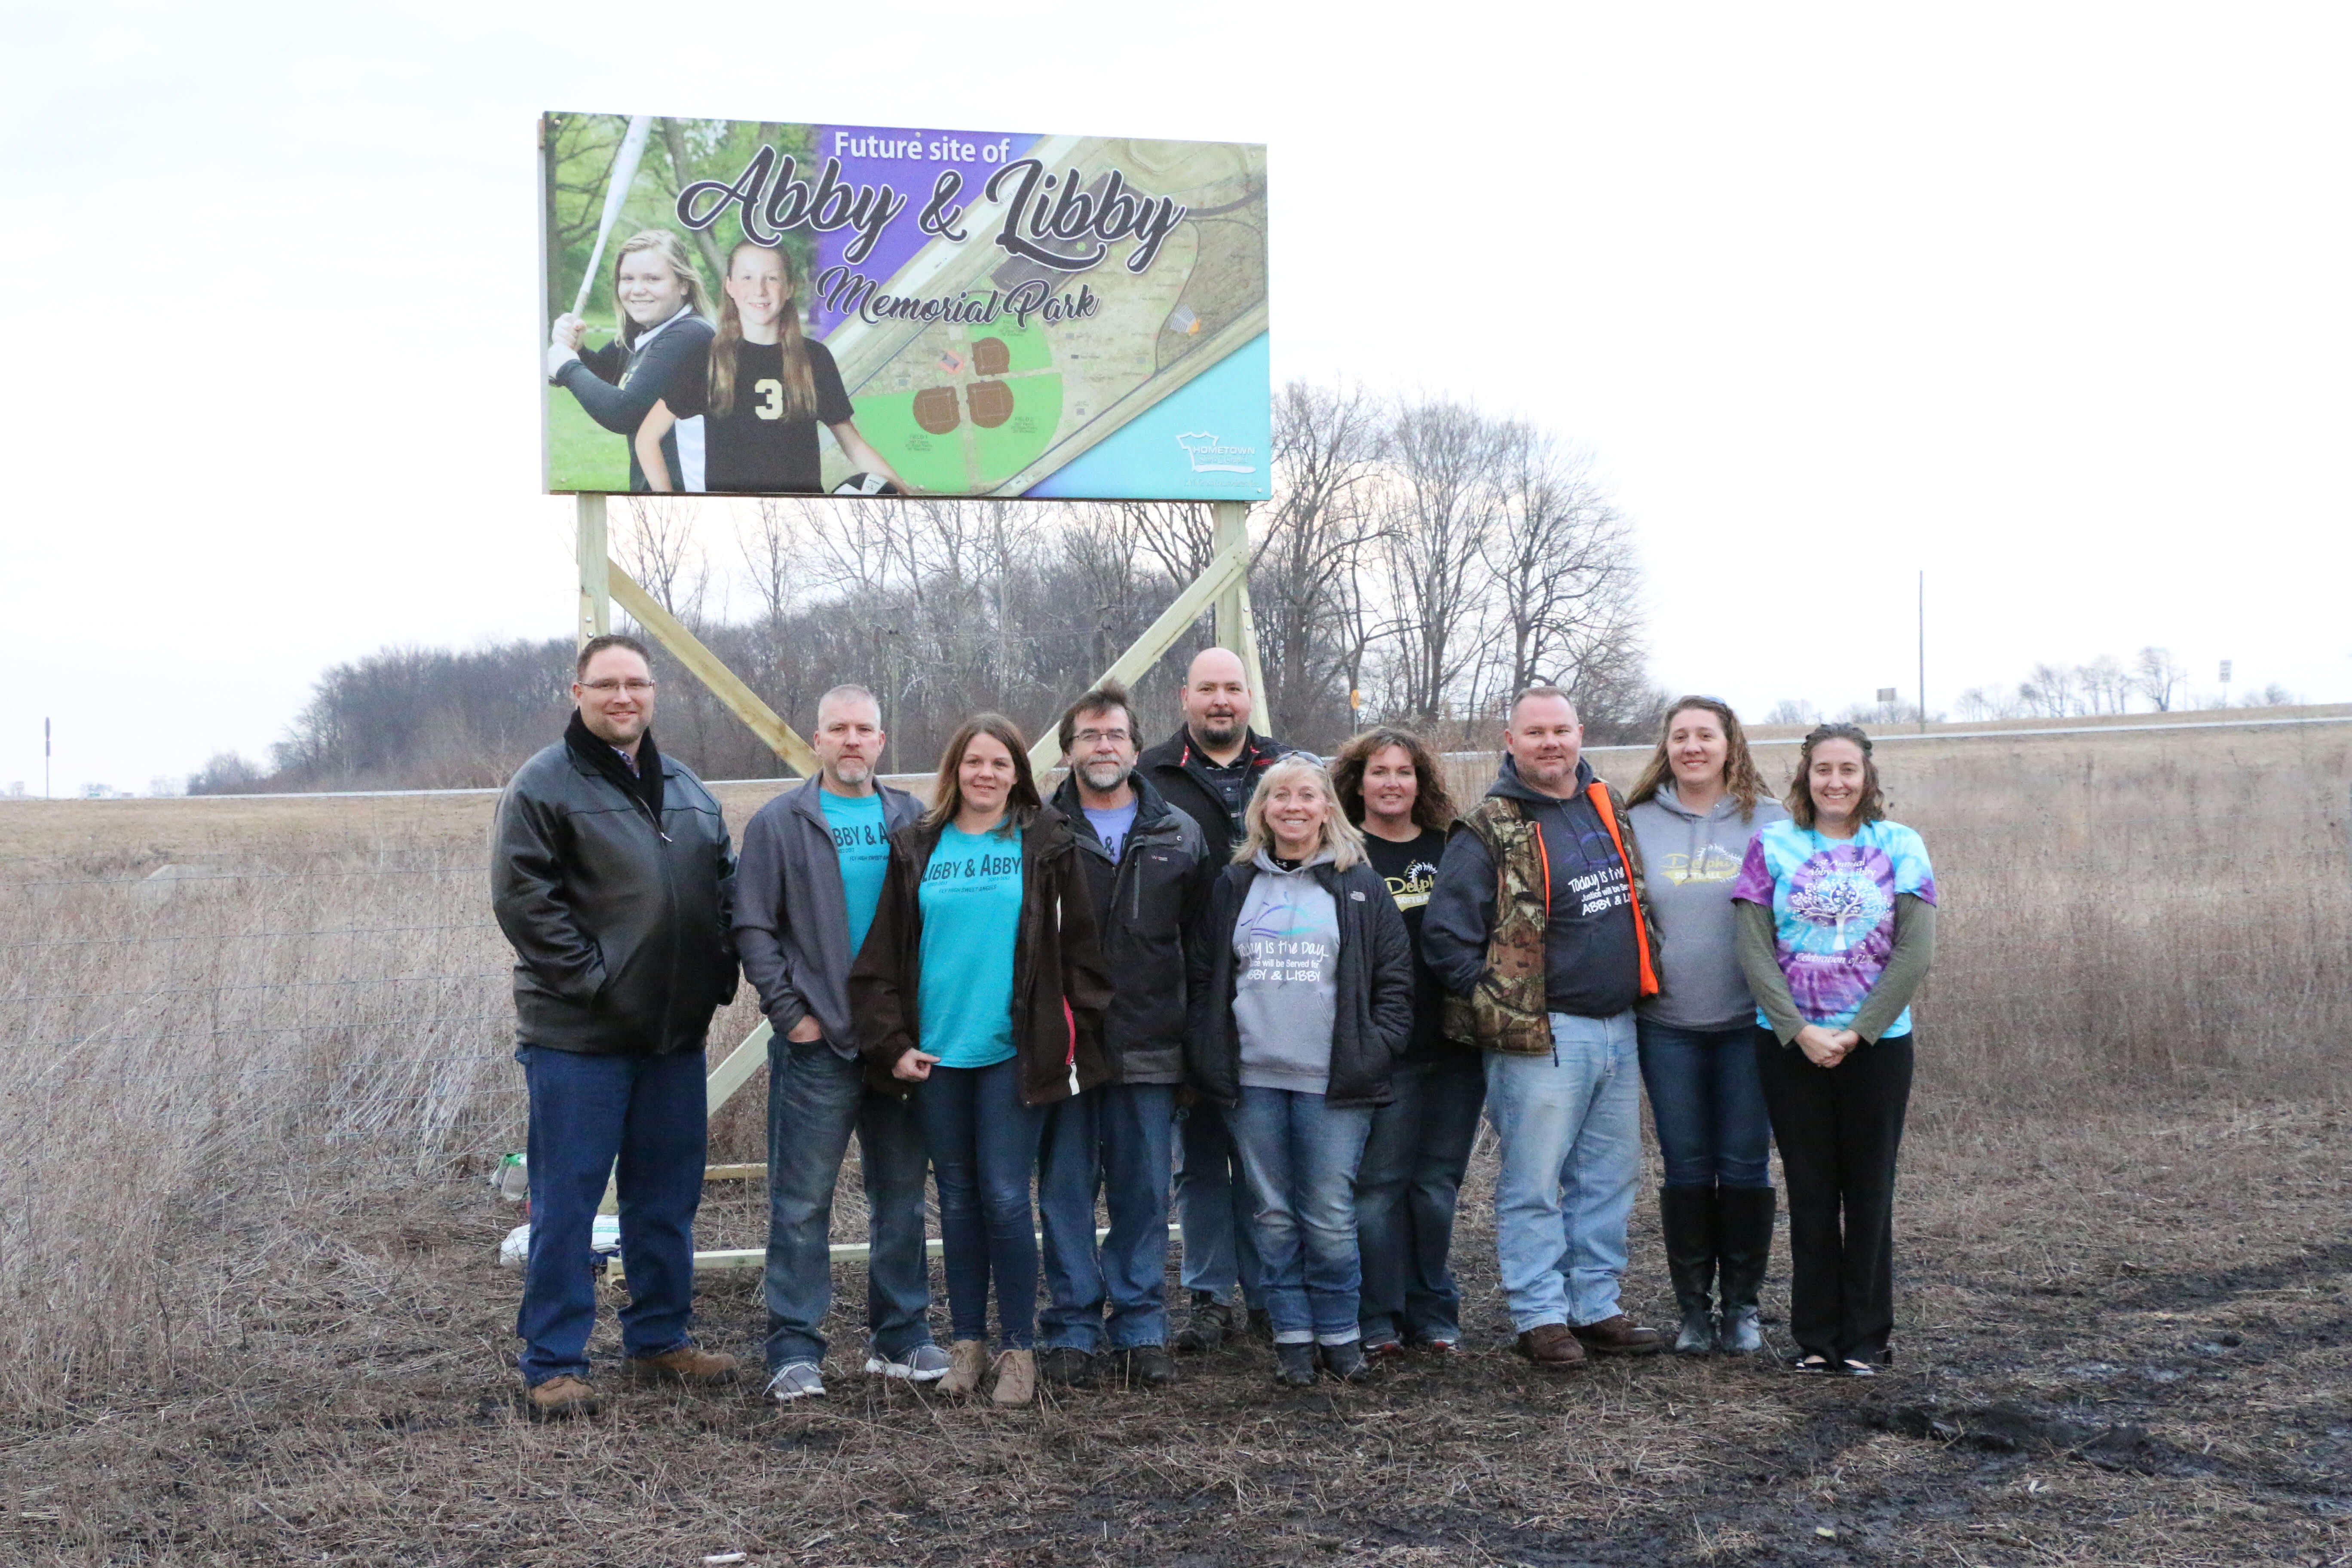 Family and Friends
			   standing in front of Abby and Libby Memorial Park Billboard